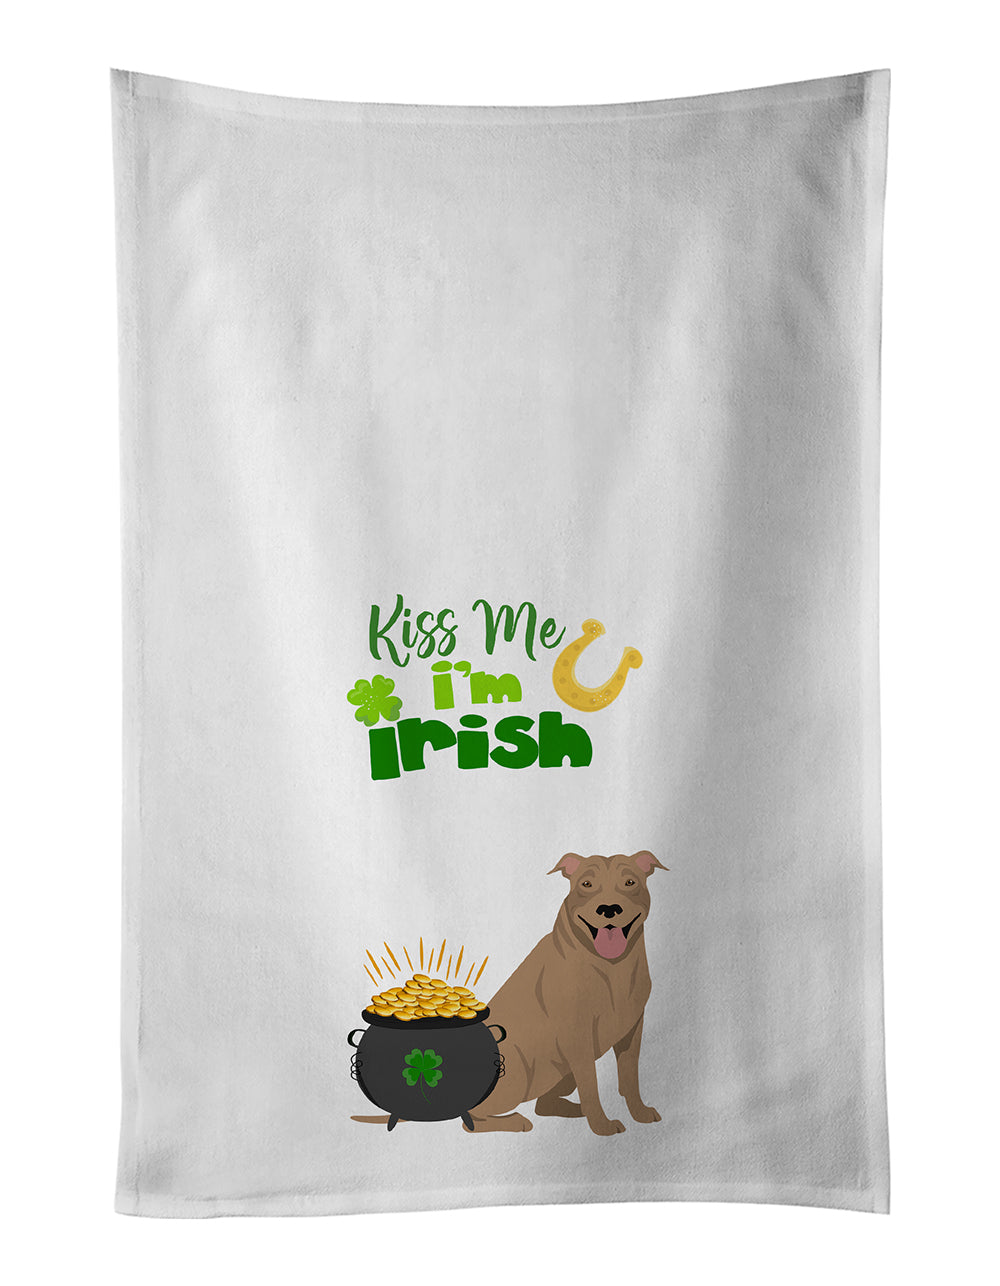 Buy this Fawn Pit Bull Terrier St. Patrick's Day White Kitchen Towel Set of 2 Dish Towels